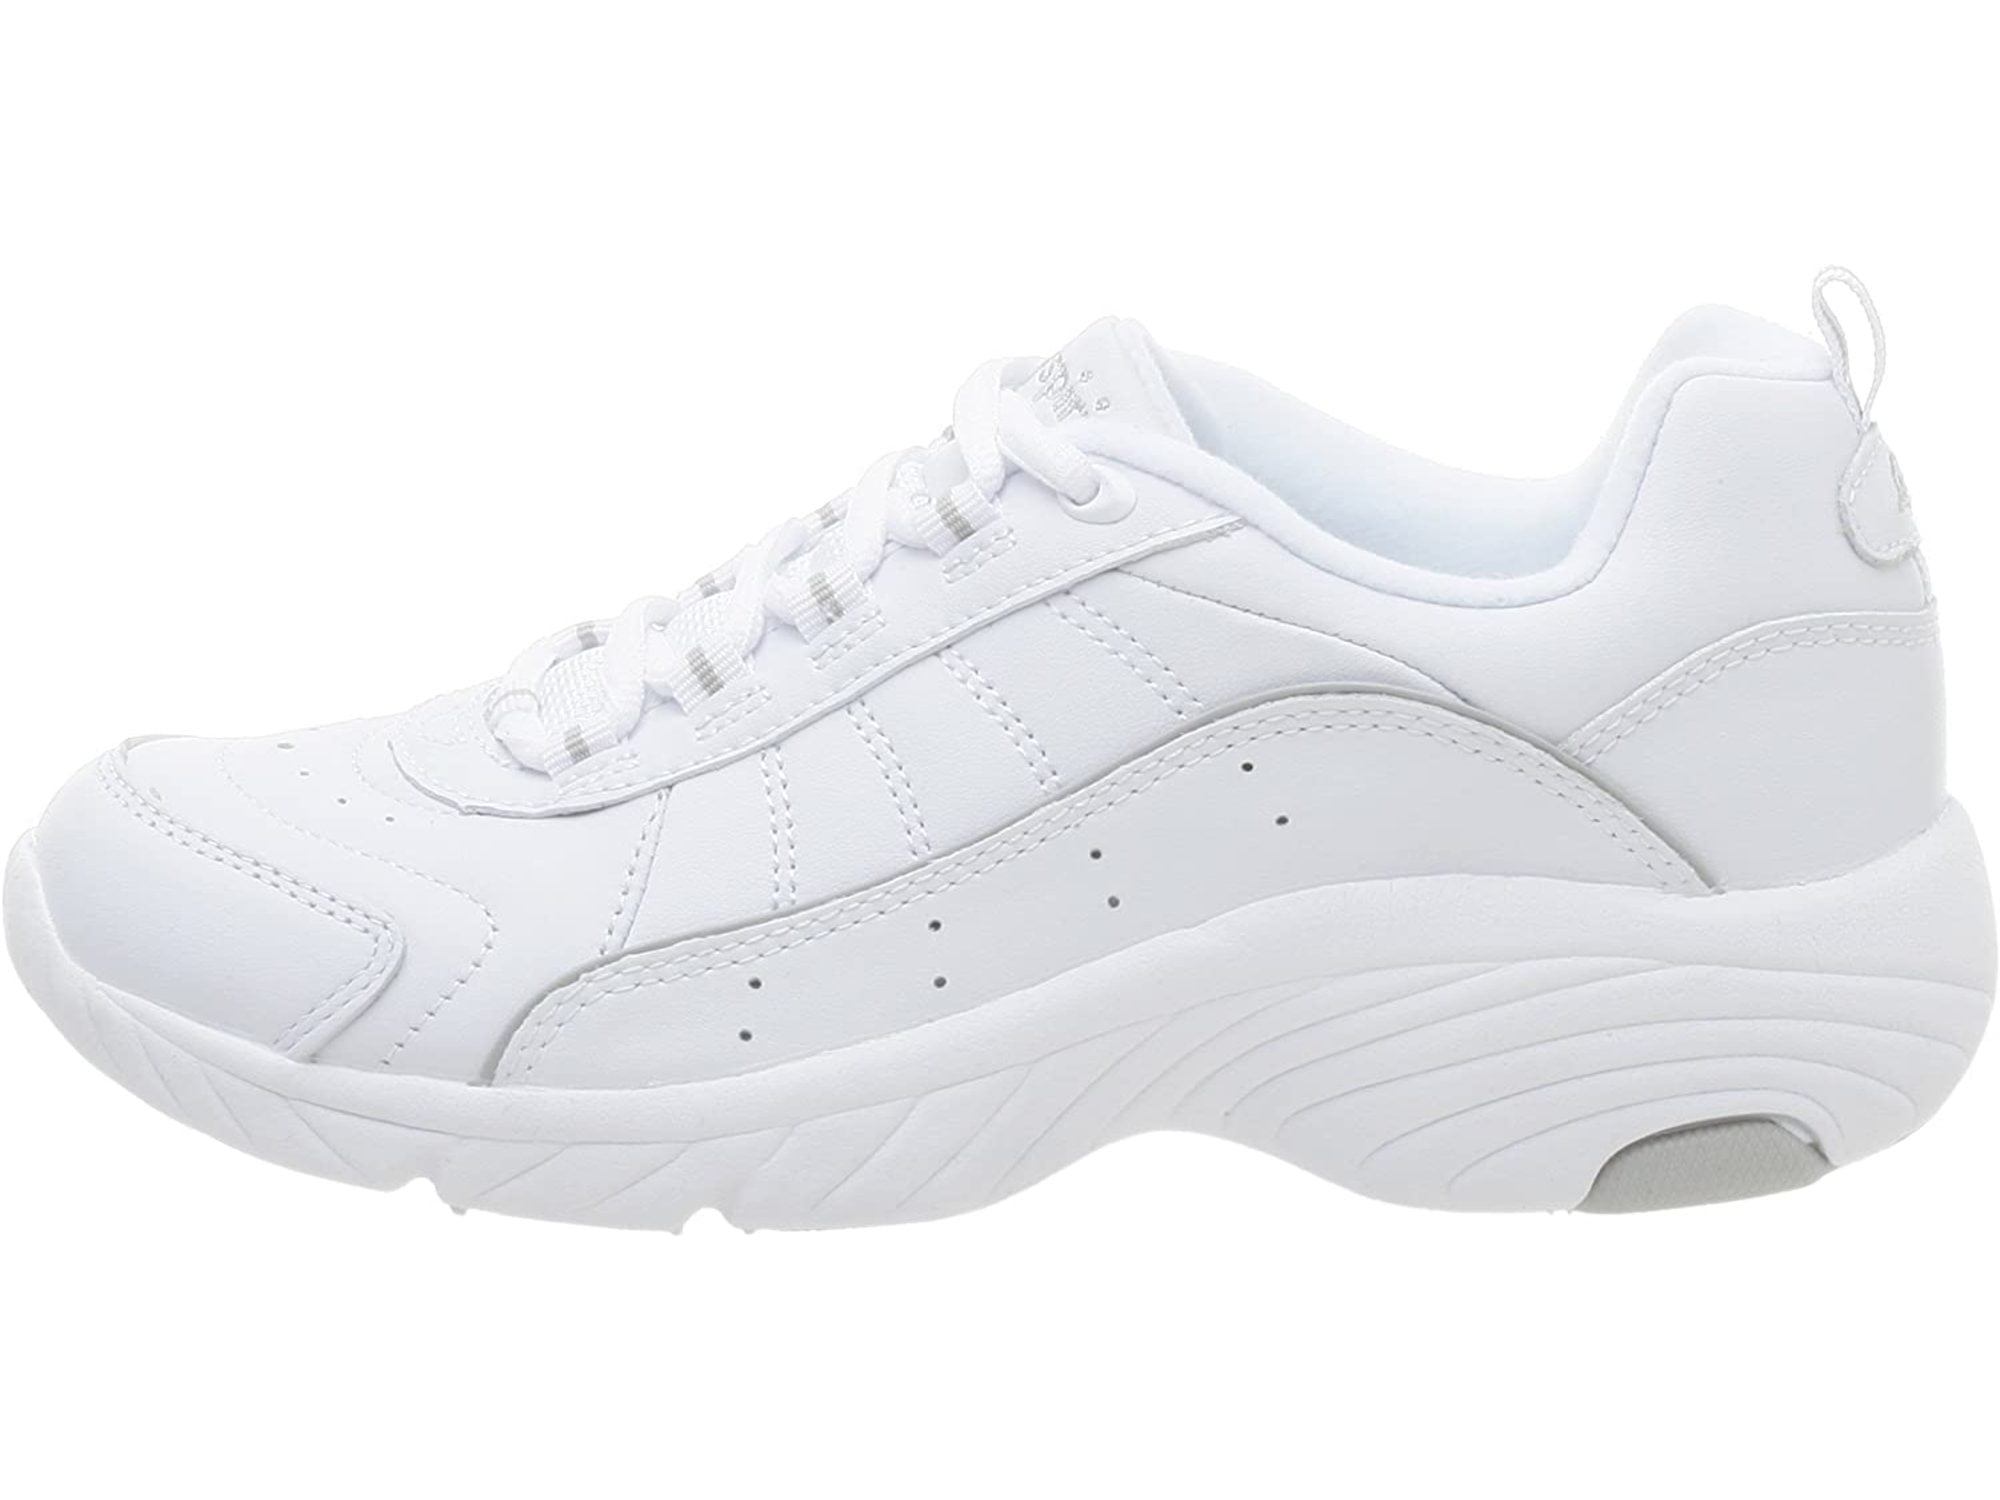 leather top tennis shoes